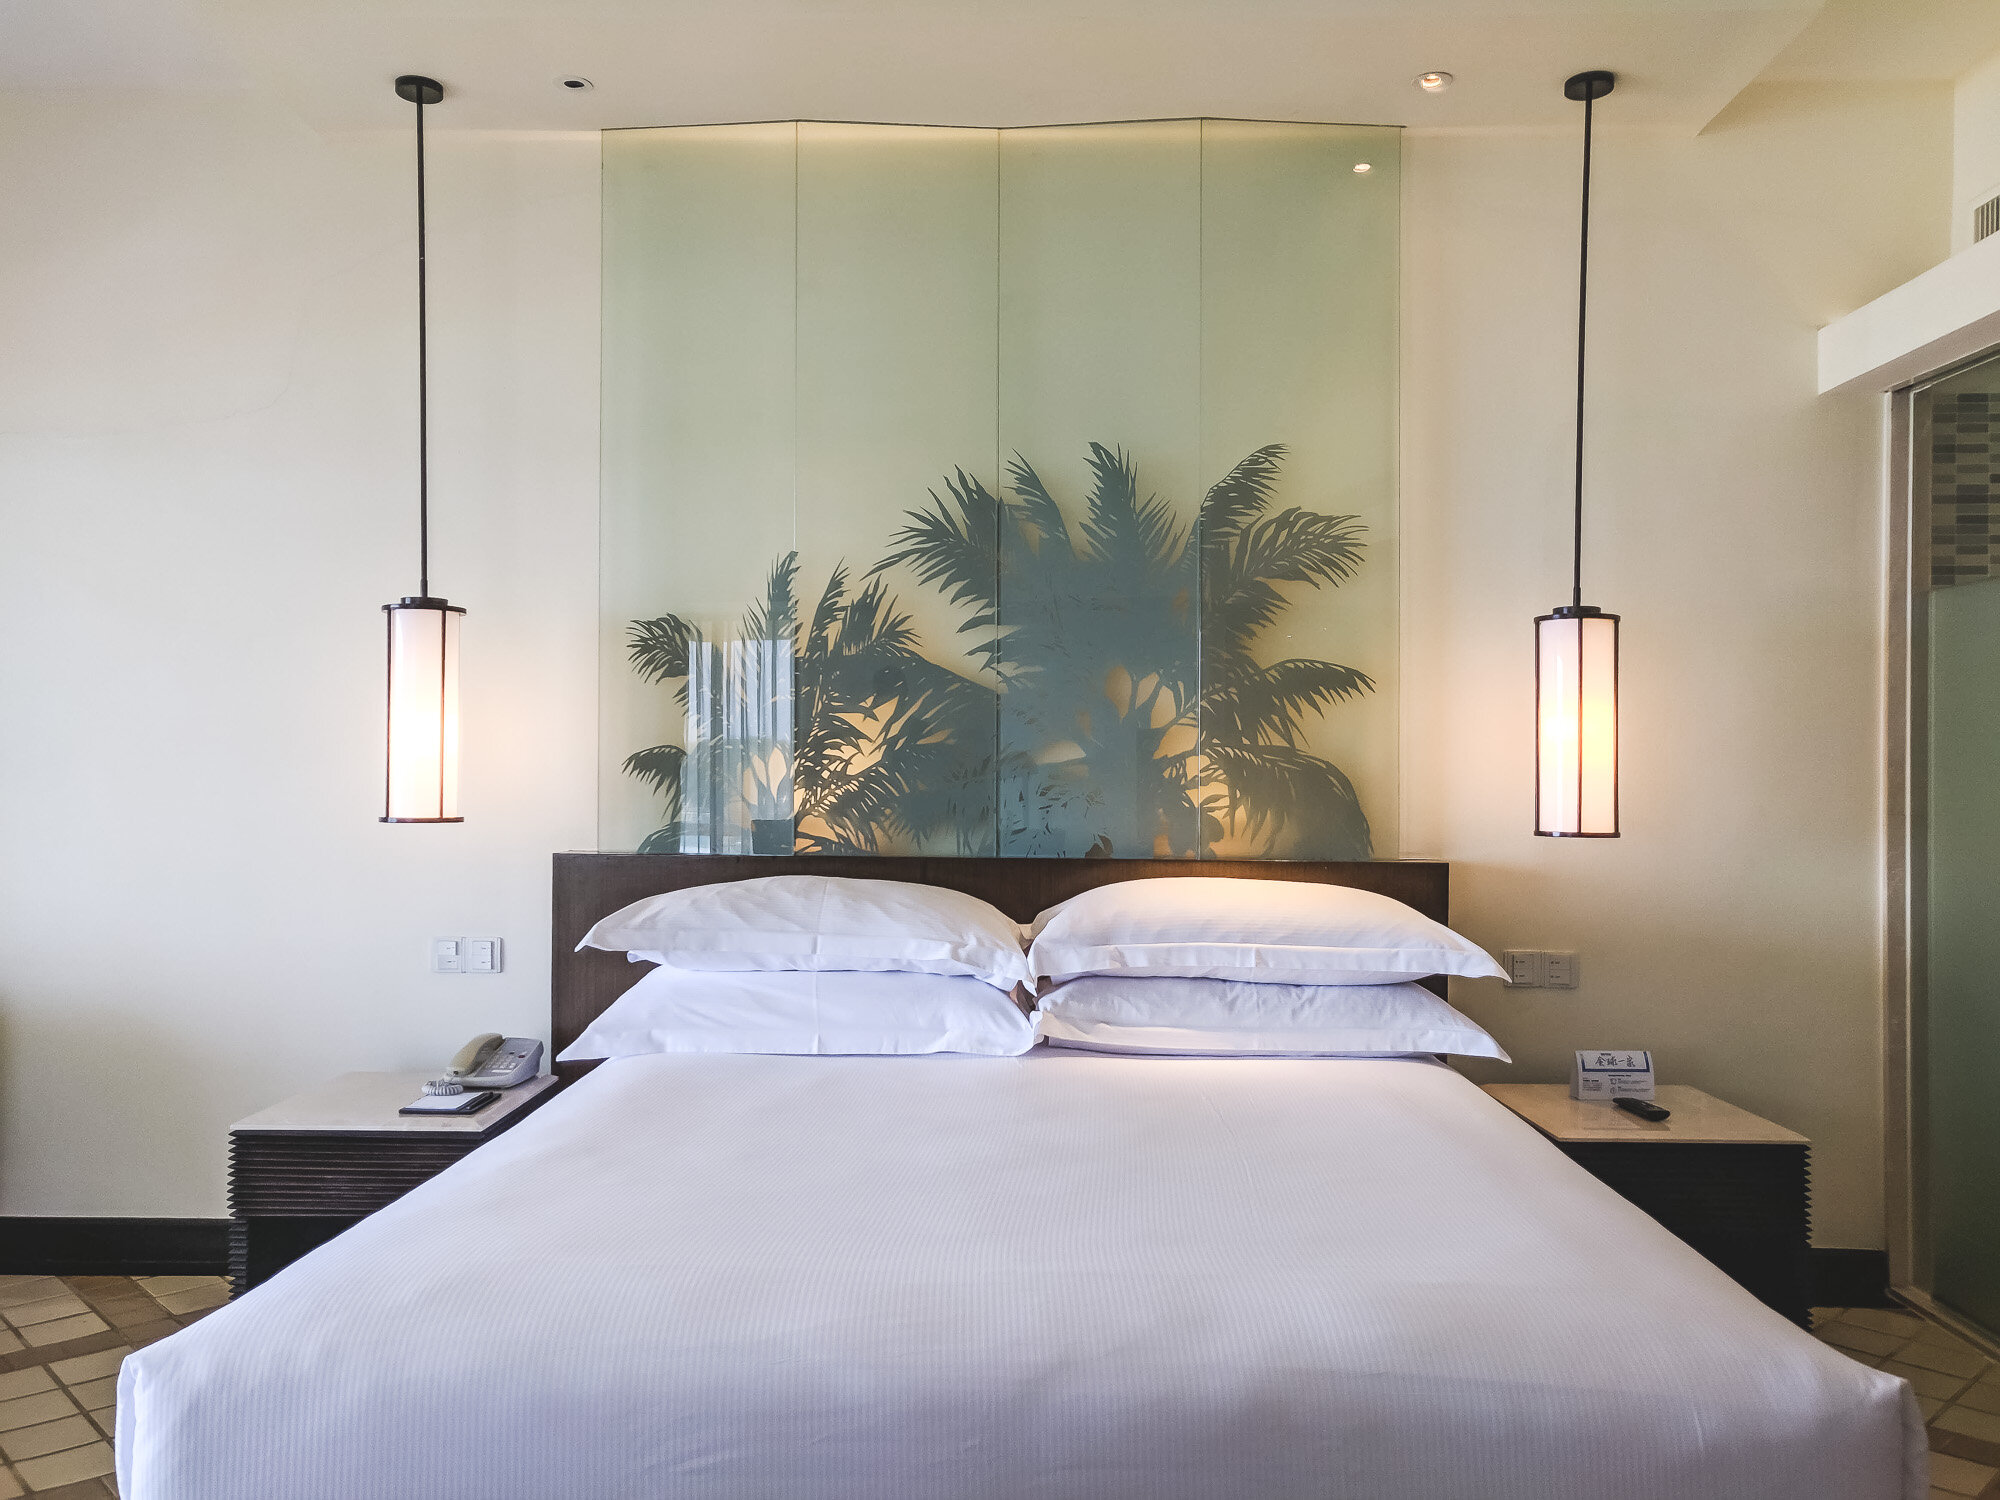 Nice silhouette of palm trees behind the bed